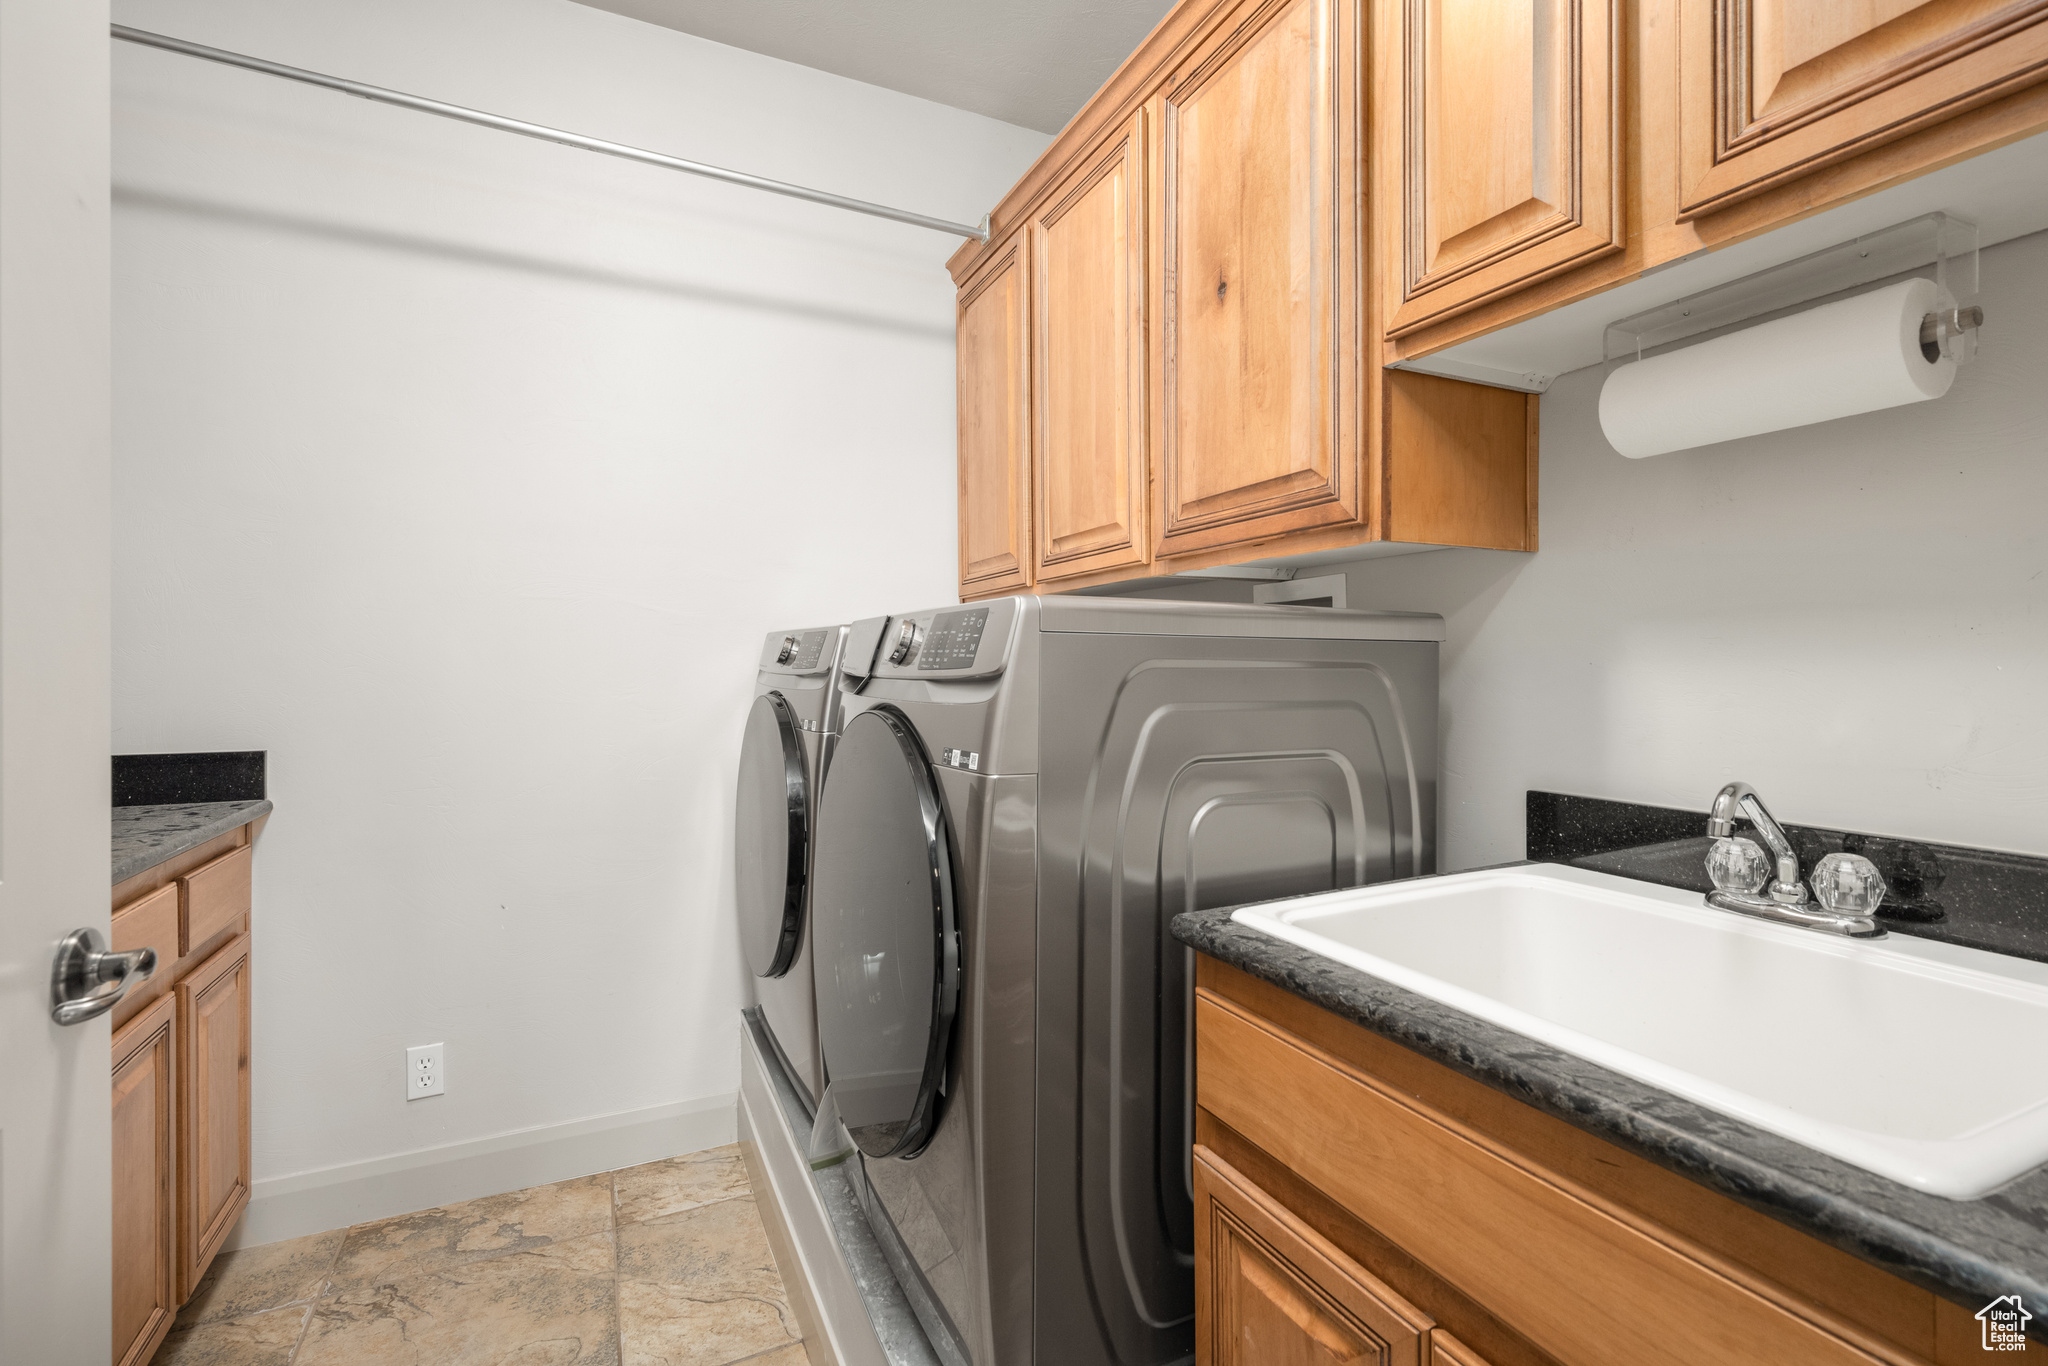 Washroom featuring washing machine and clothes dryer, cabinets, sink, and light tile floors